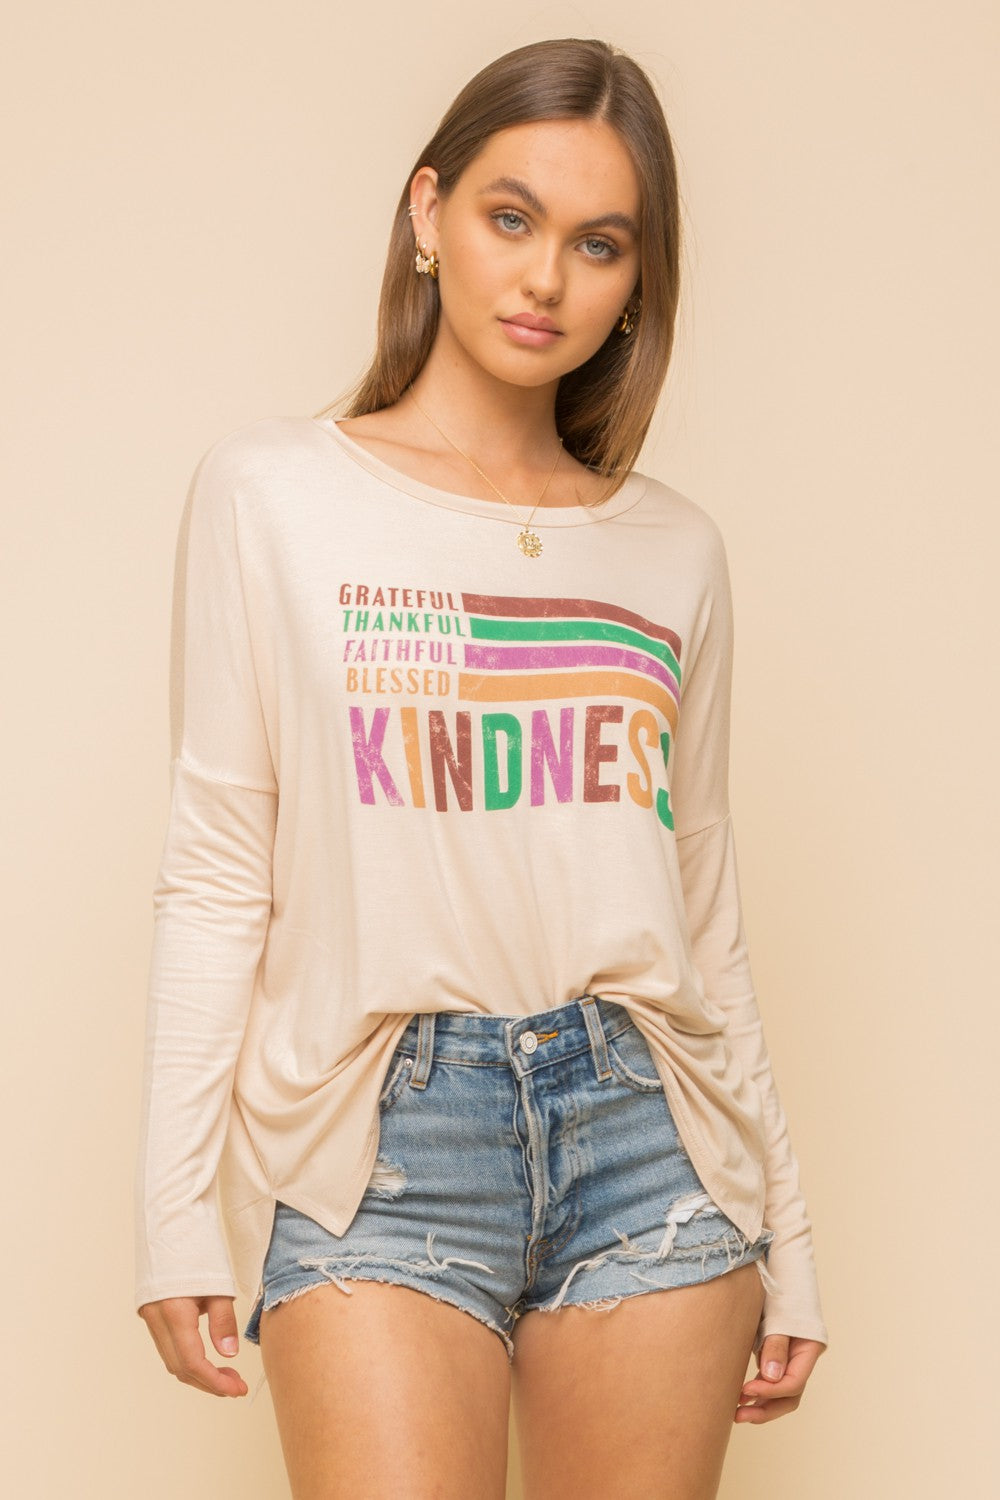 Kindness Oversized Top